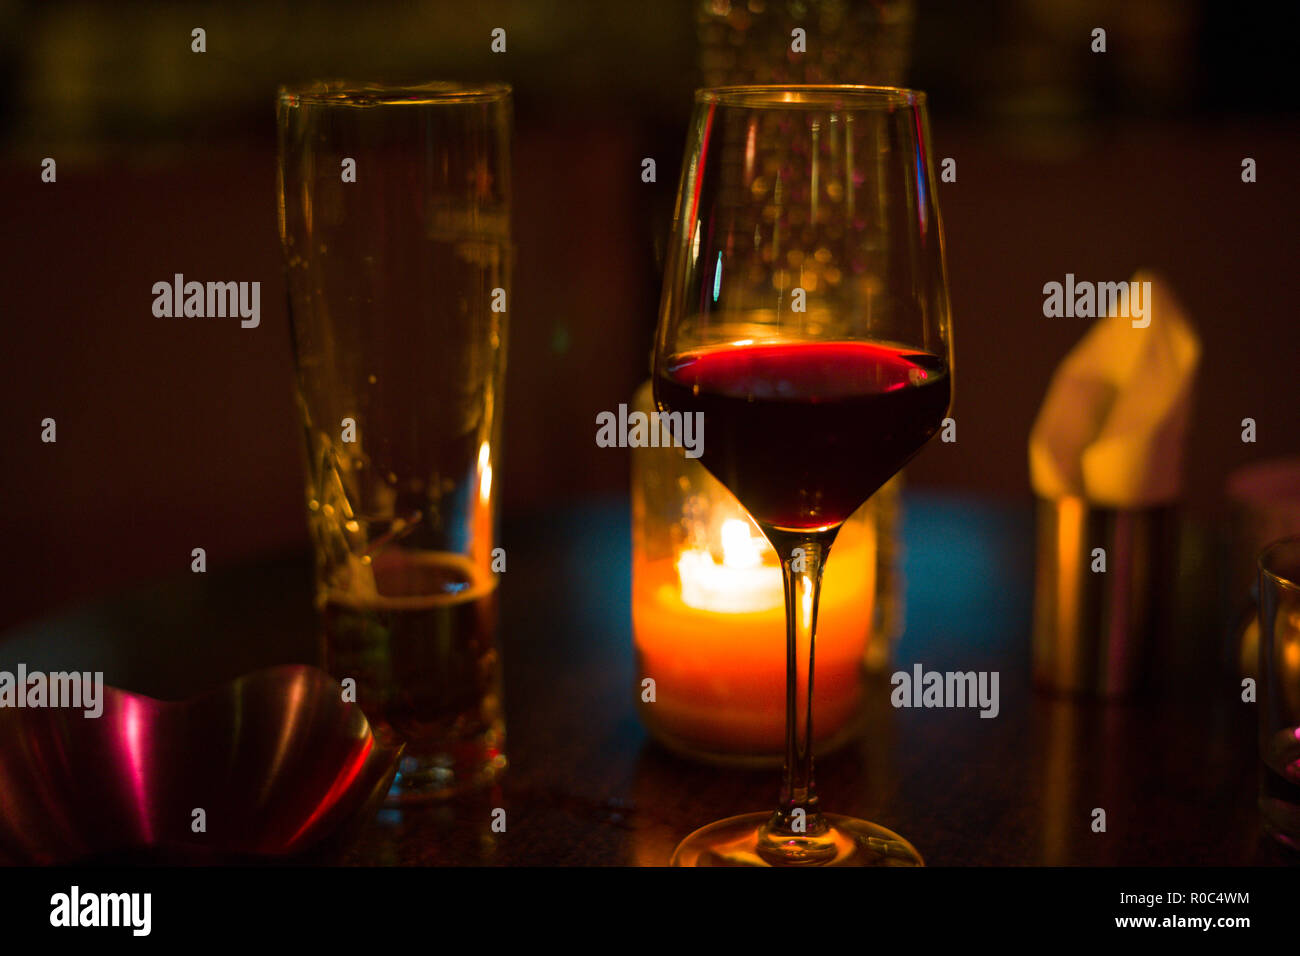 A glass of red wine and a glass of beer on a bar table. Stock Photo